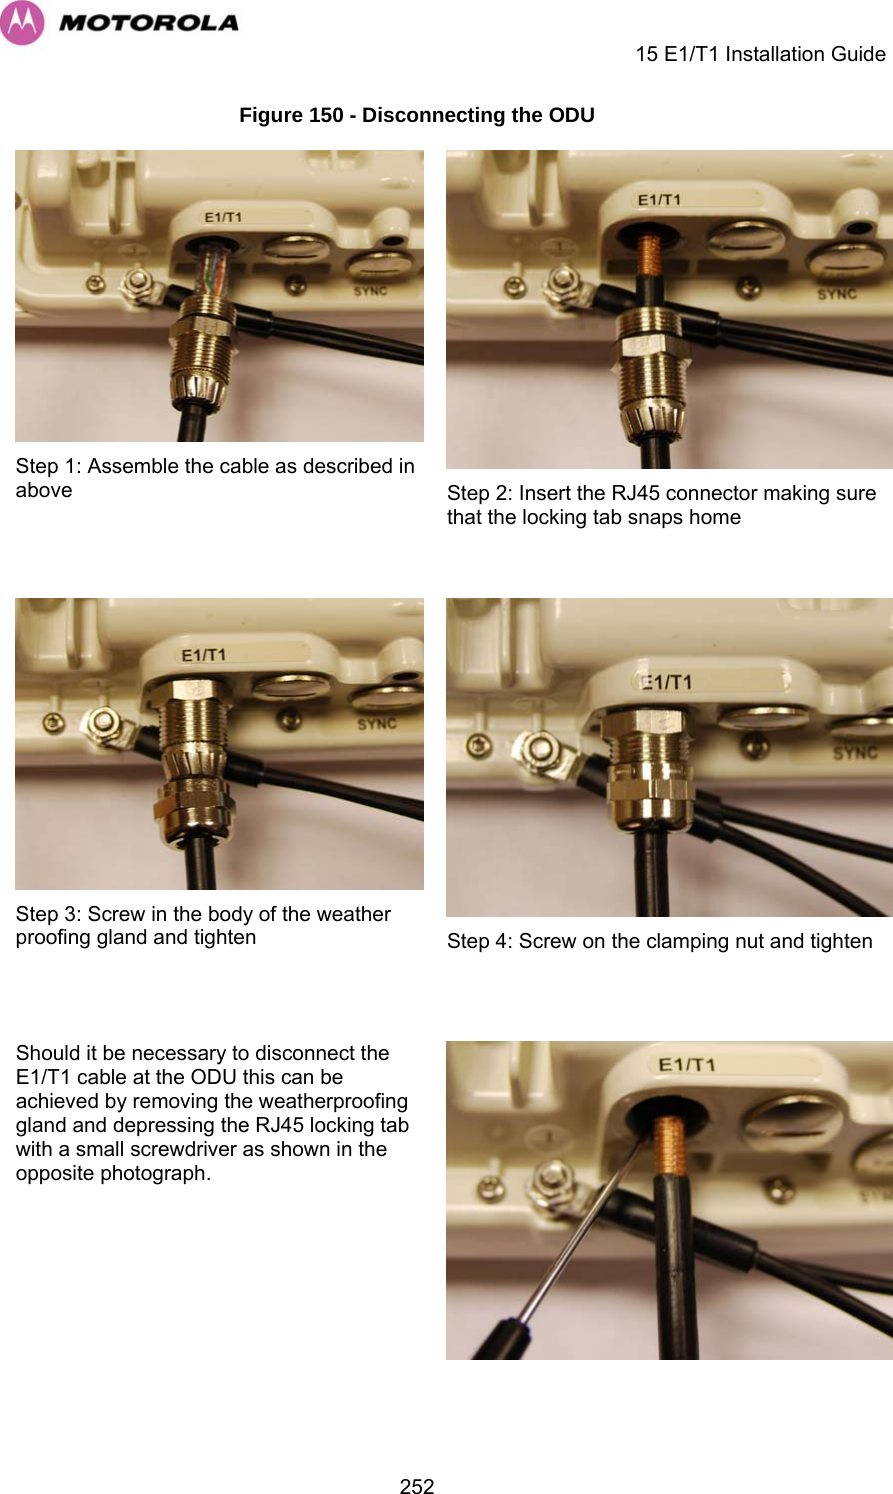     15 E1/T1 Installation Guide  252Figure 150 - Disconnecting the ODU  Step 1: Assemble the cable as described in above  Step 2: Insert the RJ45 connector making sure that the locking tab snaps home  Step 3: Screw in the body of the weather proofing gland and tighten  Step 4: Screw on the clamping nut and tighten Should it be necessary to disconnect the E1/T1 cable at the ODU this can be achieved by removing the weatherproofing gland and depressing the RJ45 locking tab with a small screwdriver as shown in the opposite photograph.    